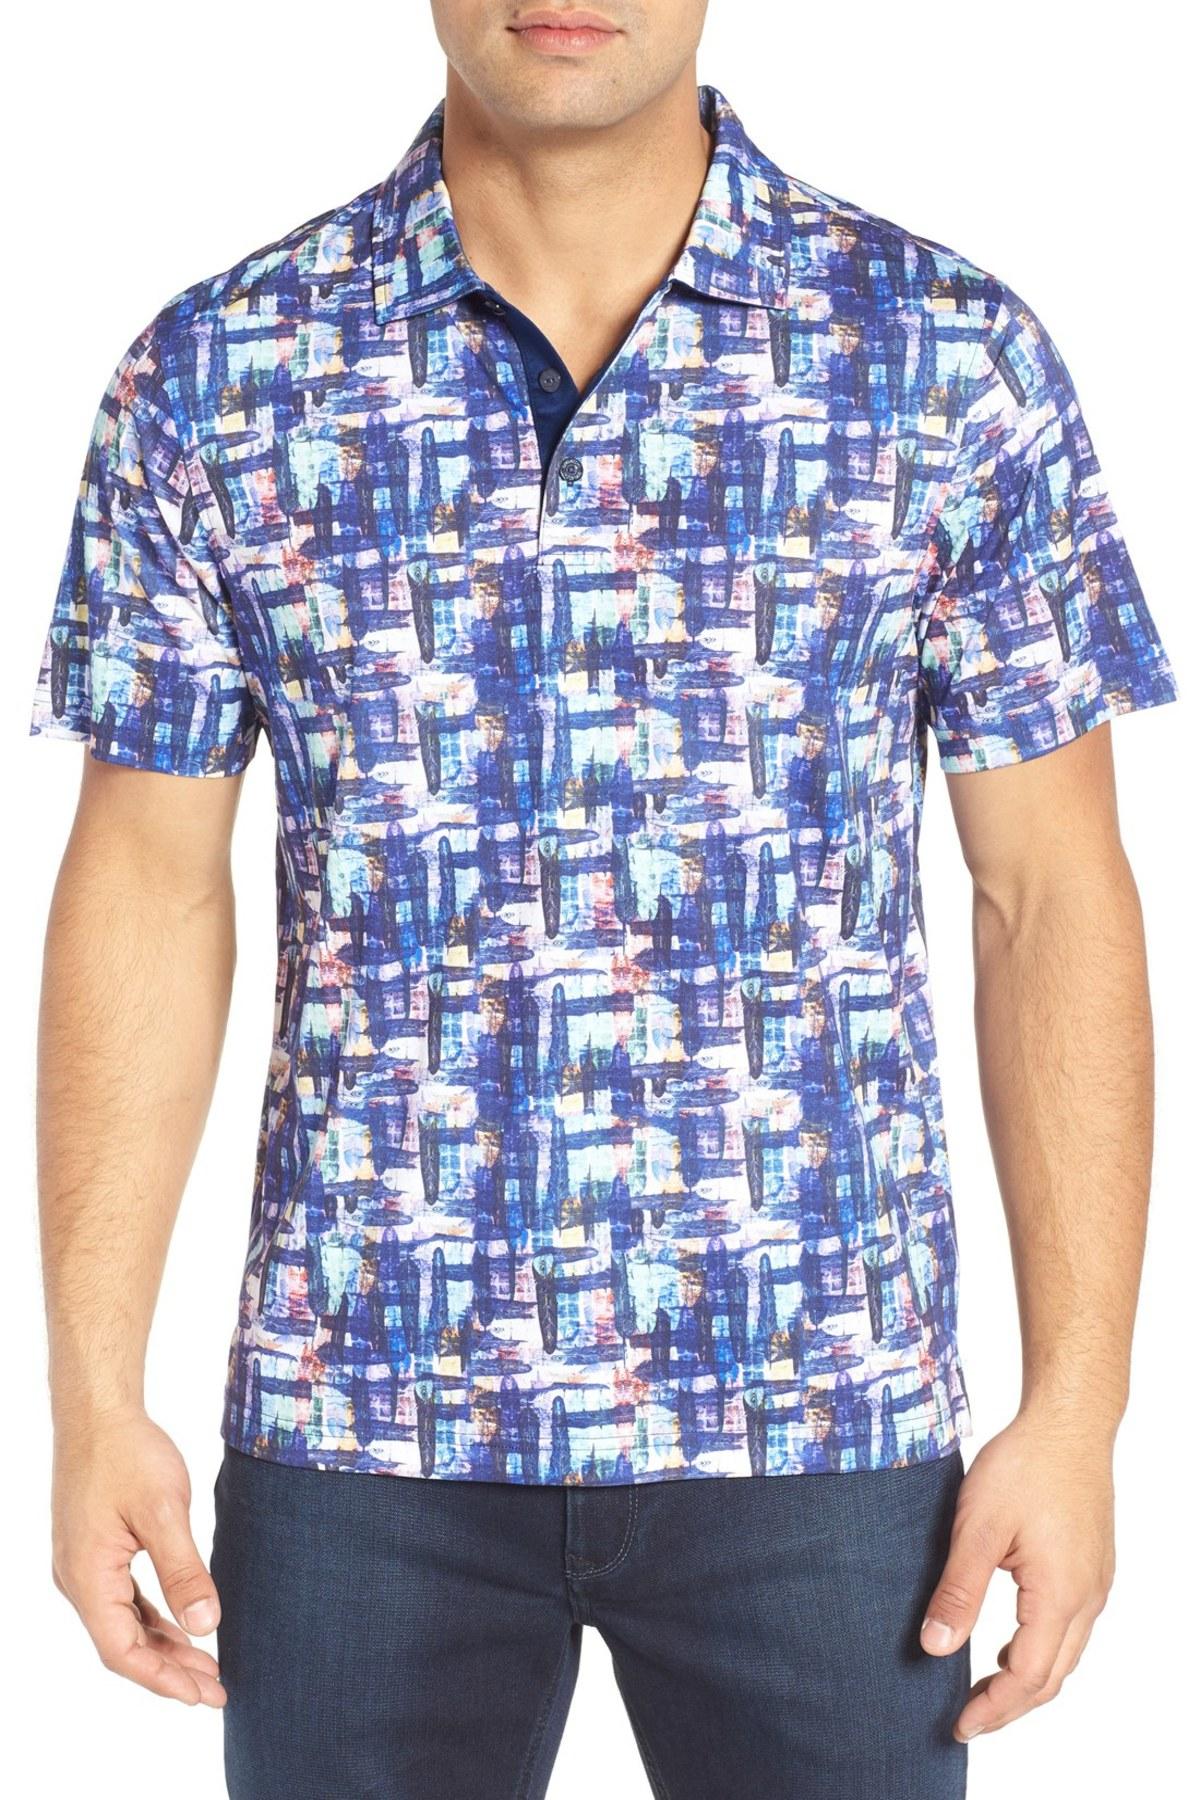 Bugatchi Print Cotton Polo Shirt in Blue for Men - Lyst